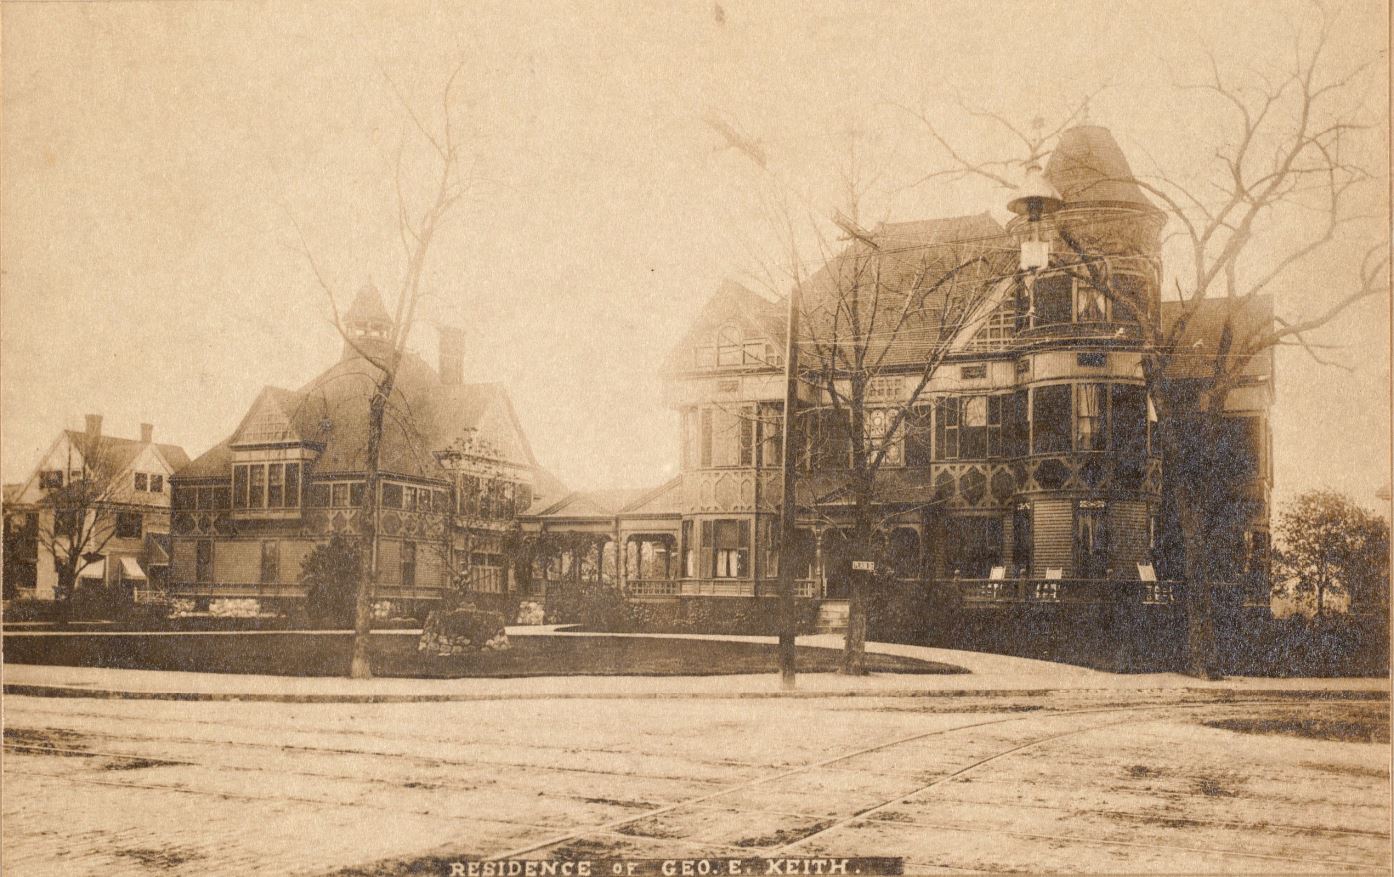 Residence of George E. Keith at the Corner of Main and Plain streets in Brockton, MA